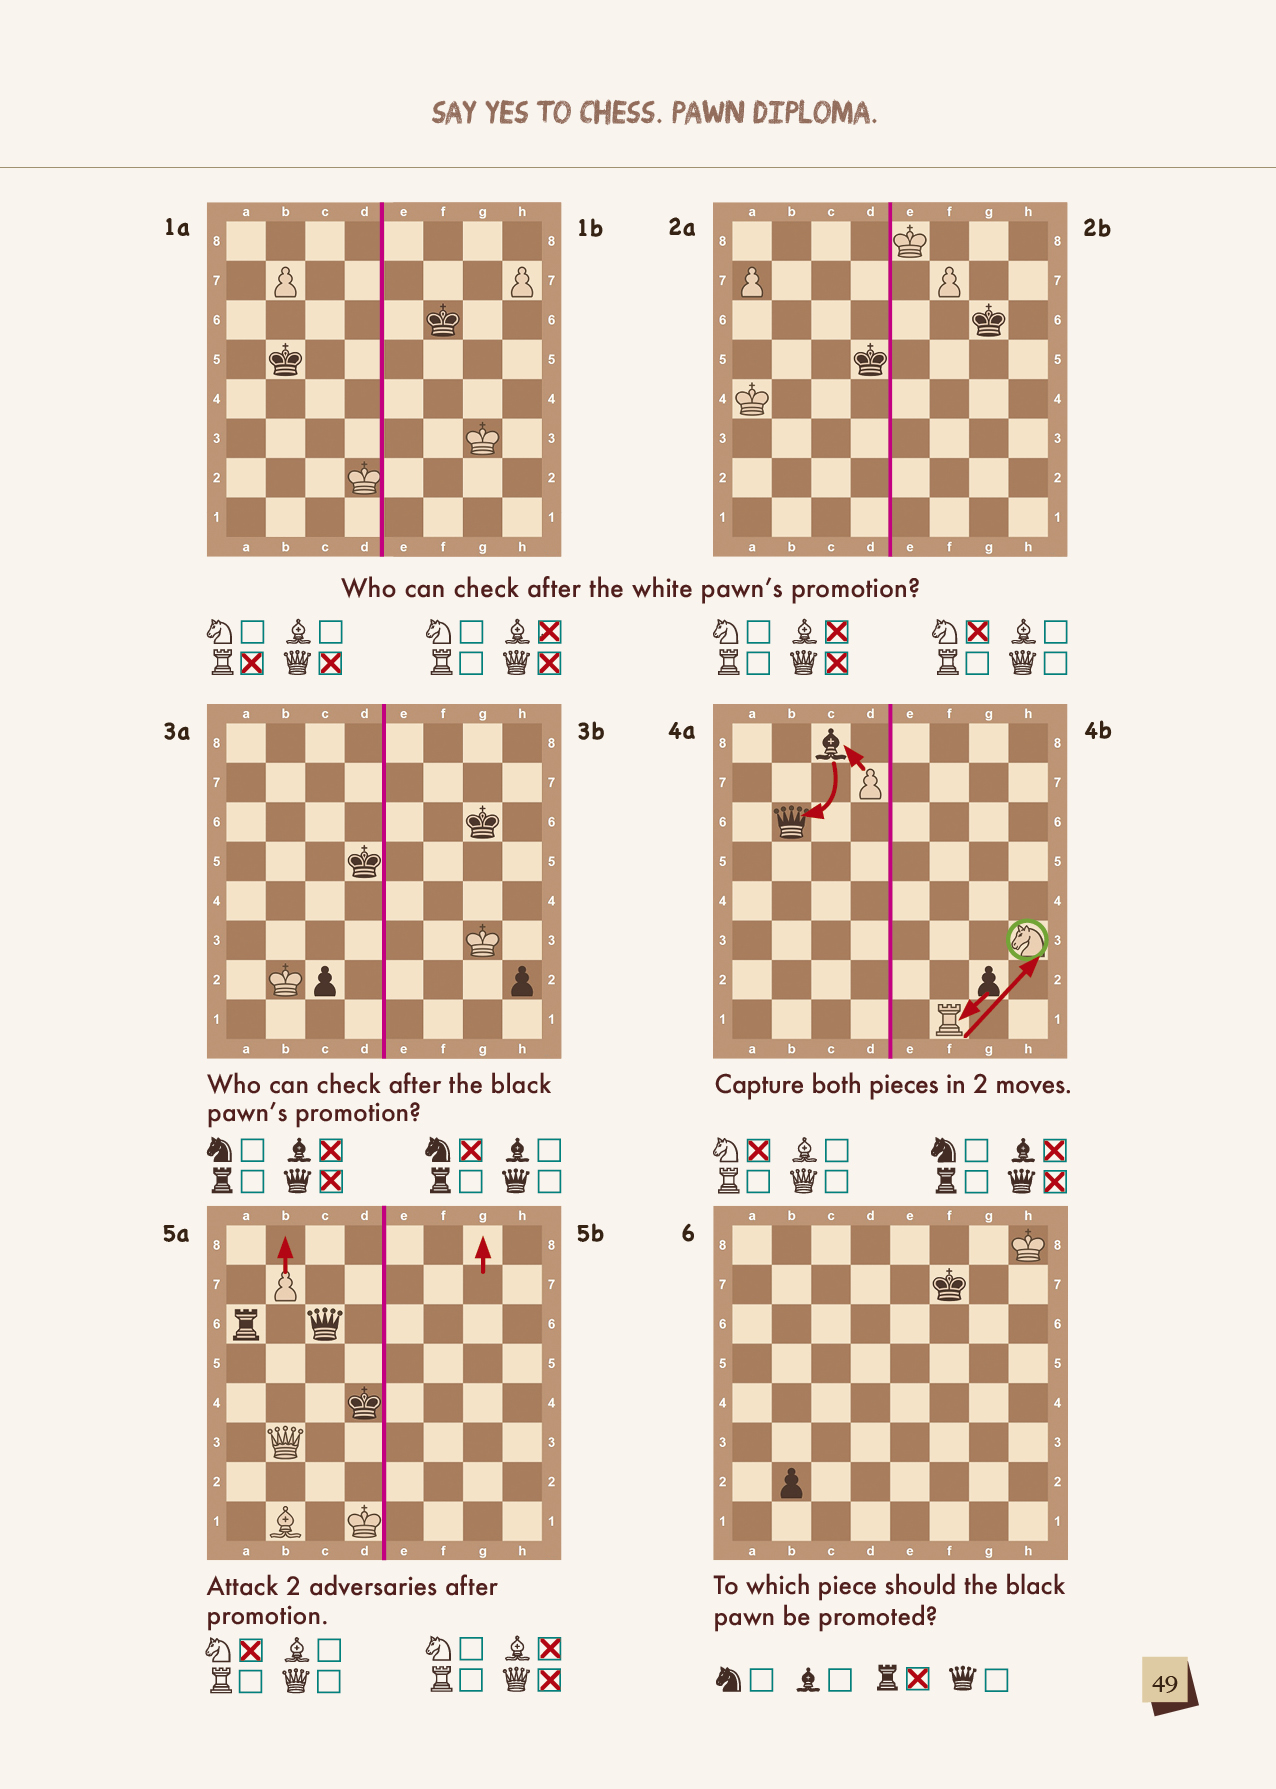 sayyes2chess_solutions_page_49.jpg